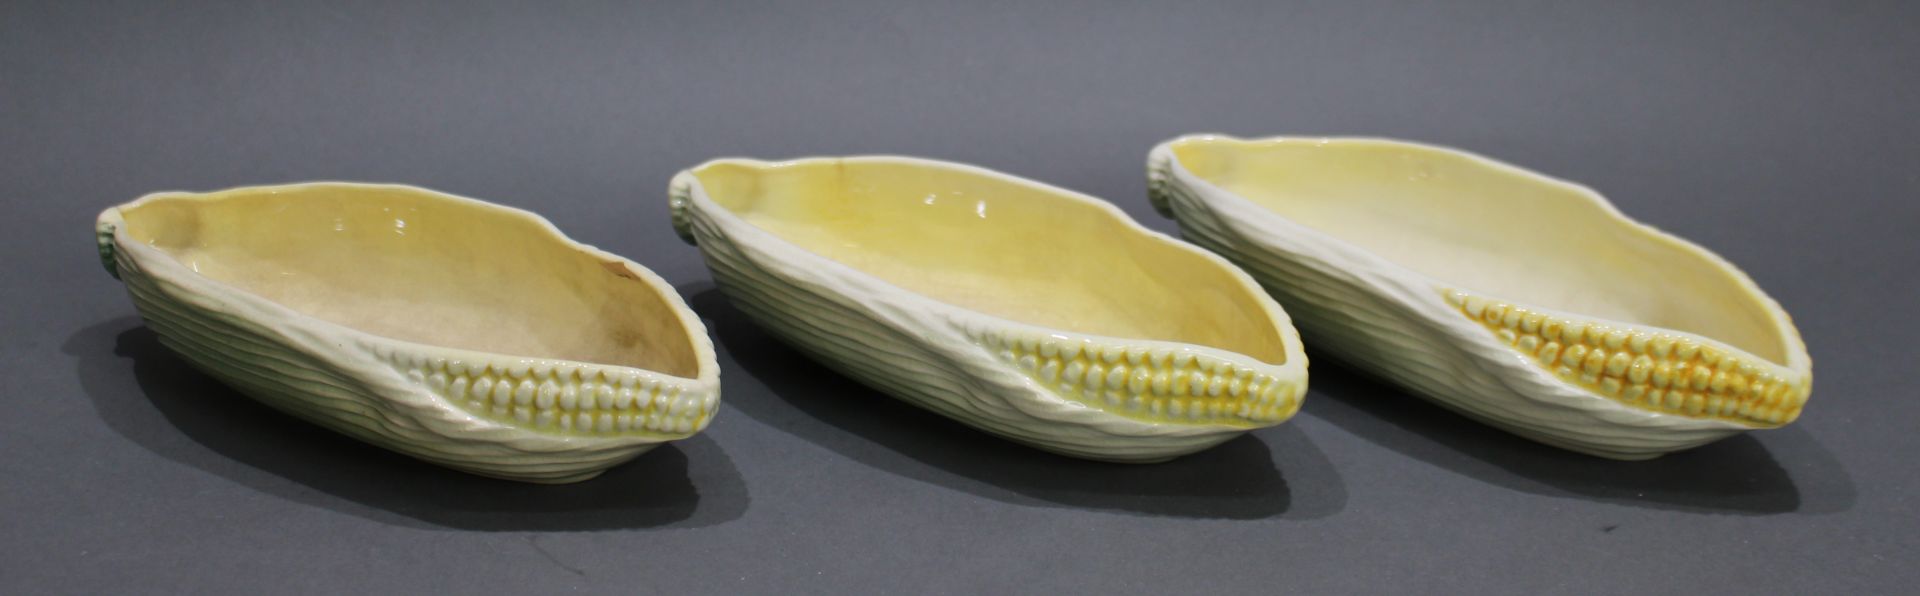 Set of 3 Early 20th c. Sylvac Sweetcorn Dishes Numbered 5043